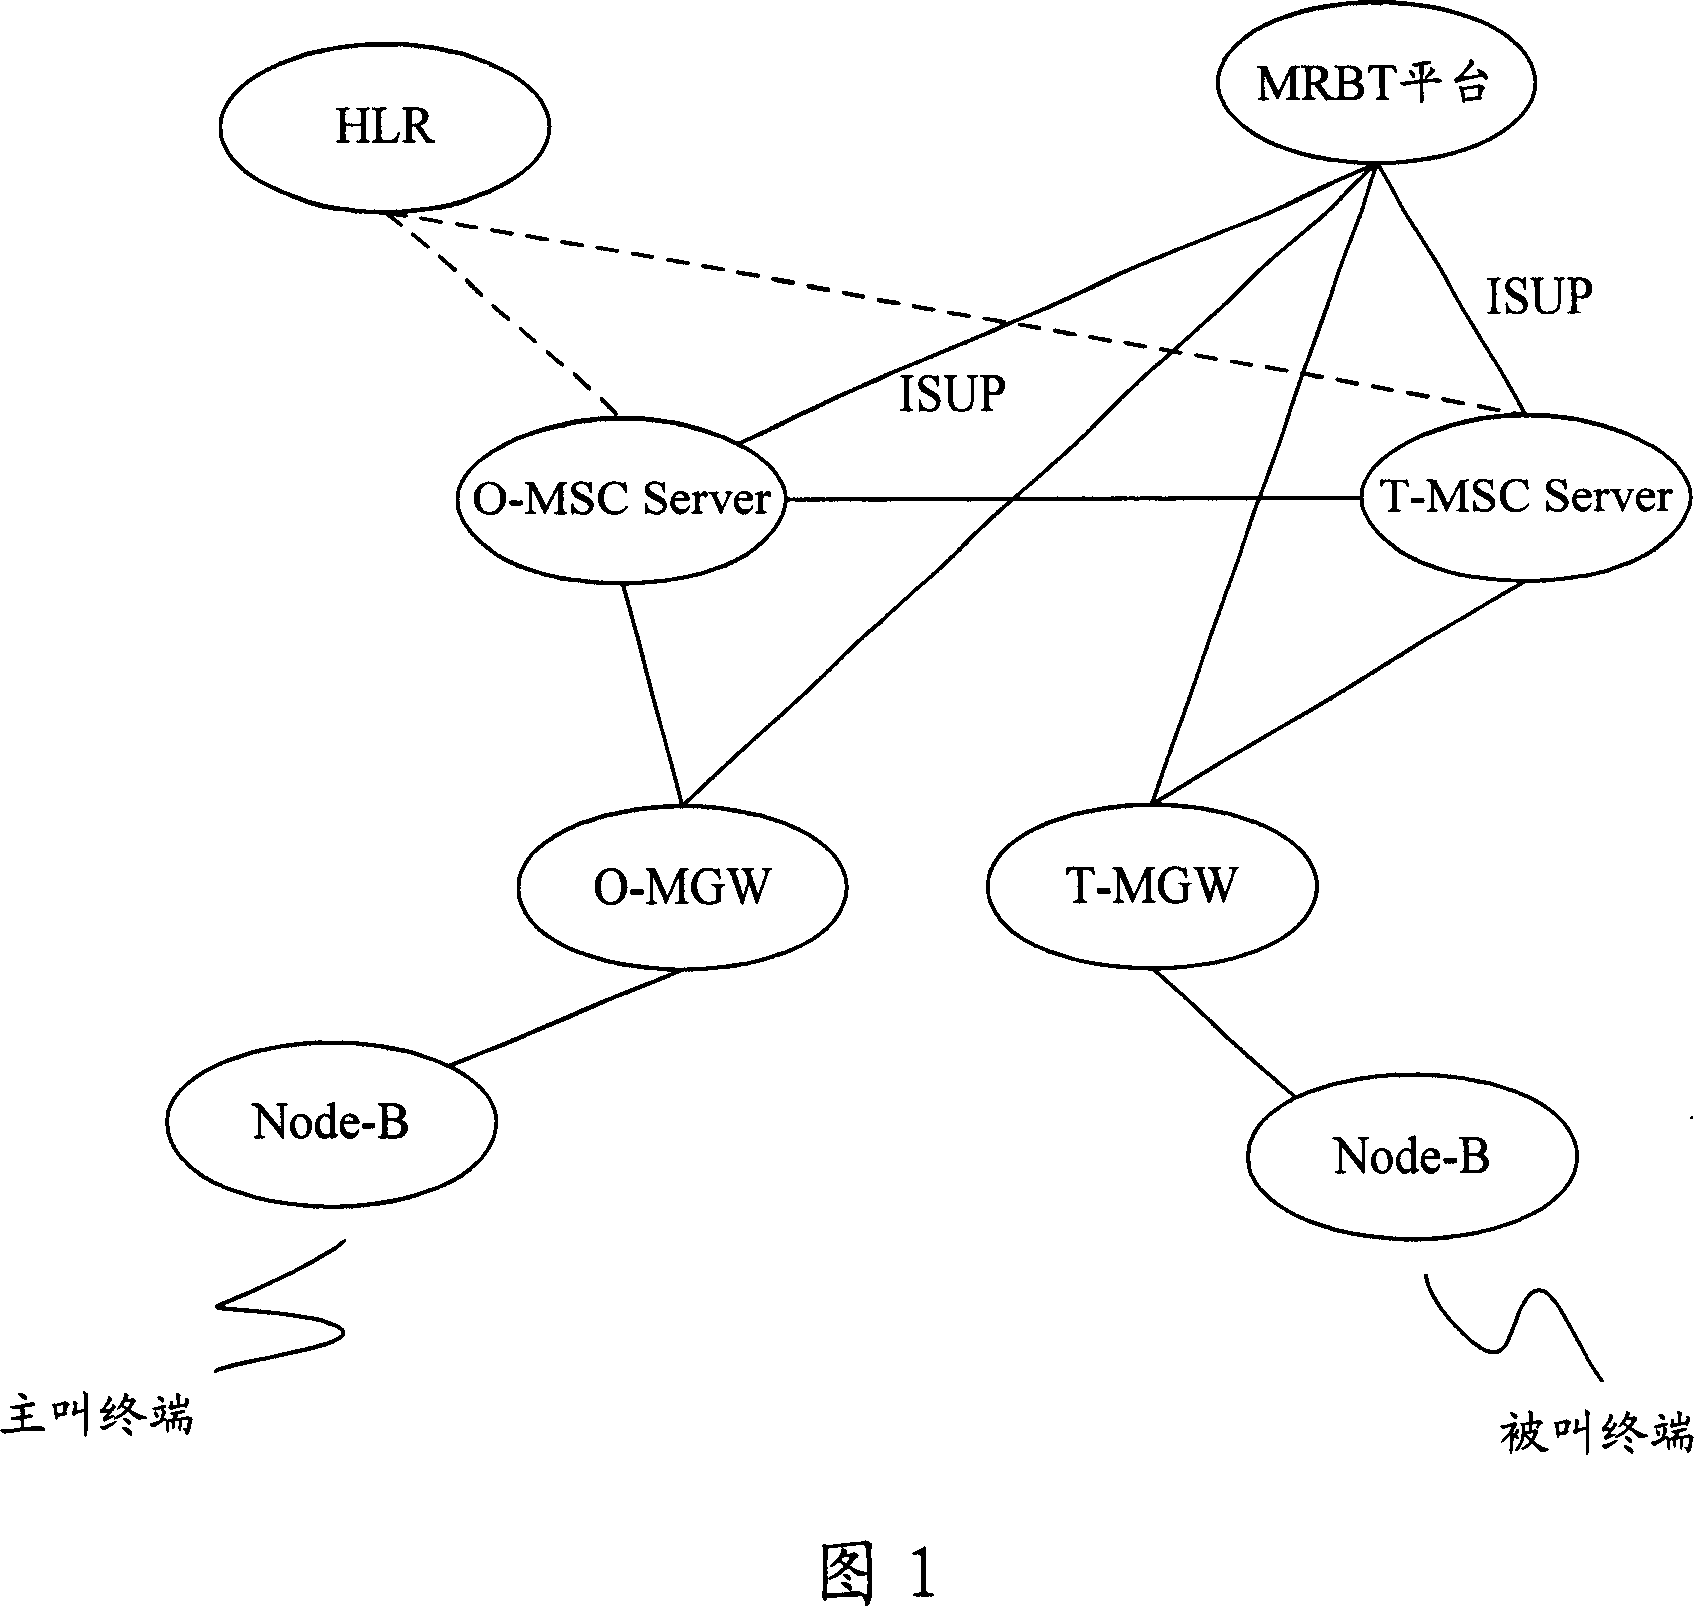 System and method for realizing multimedia color ring service